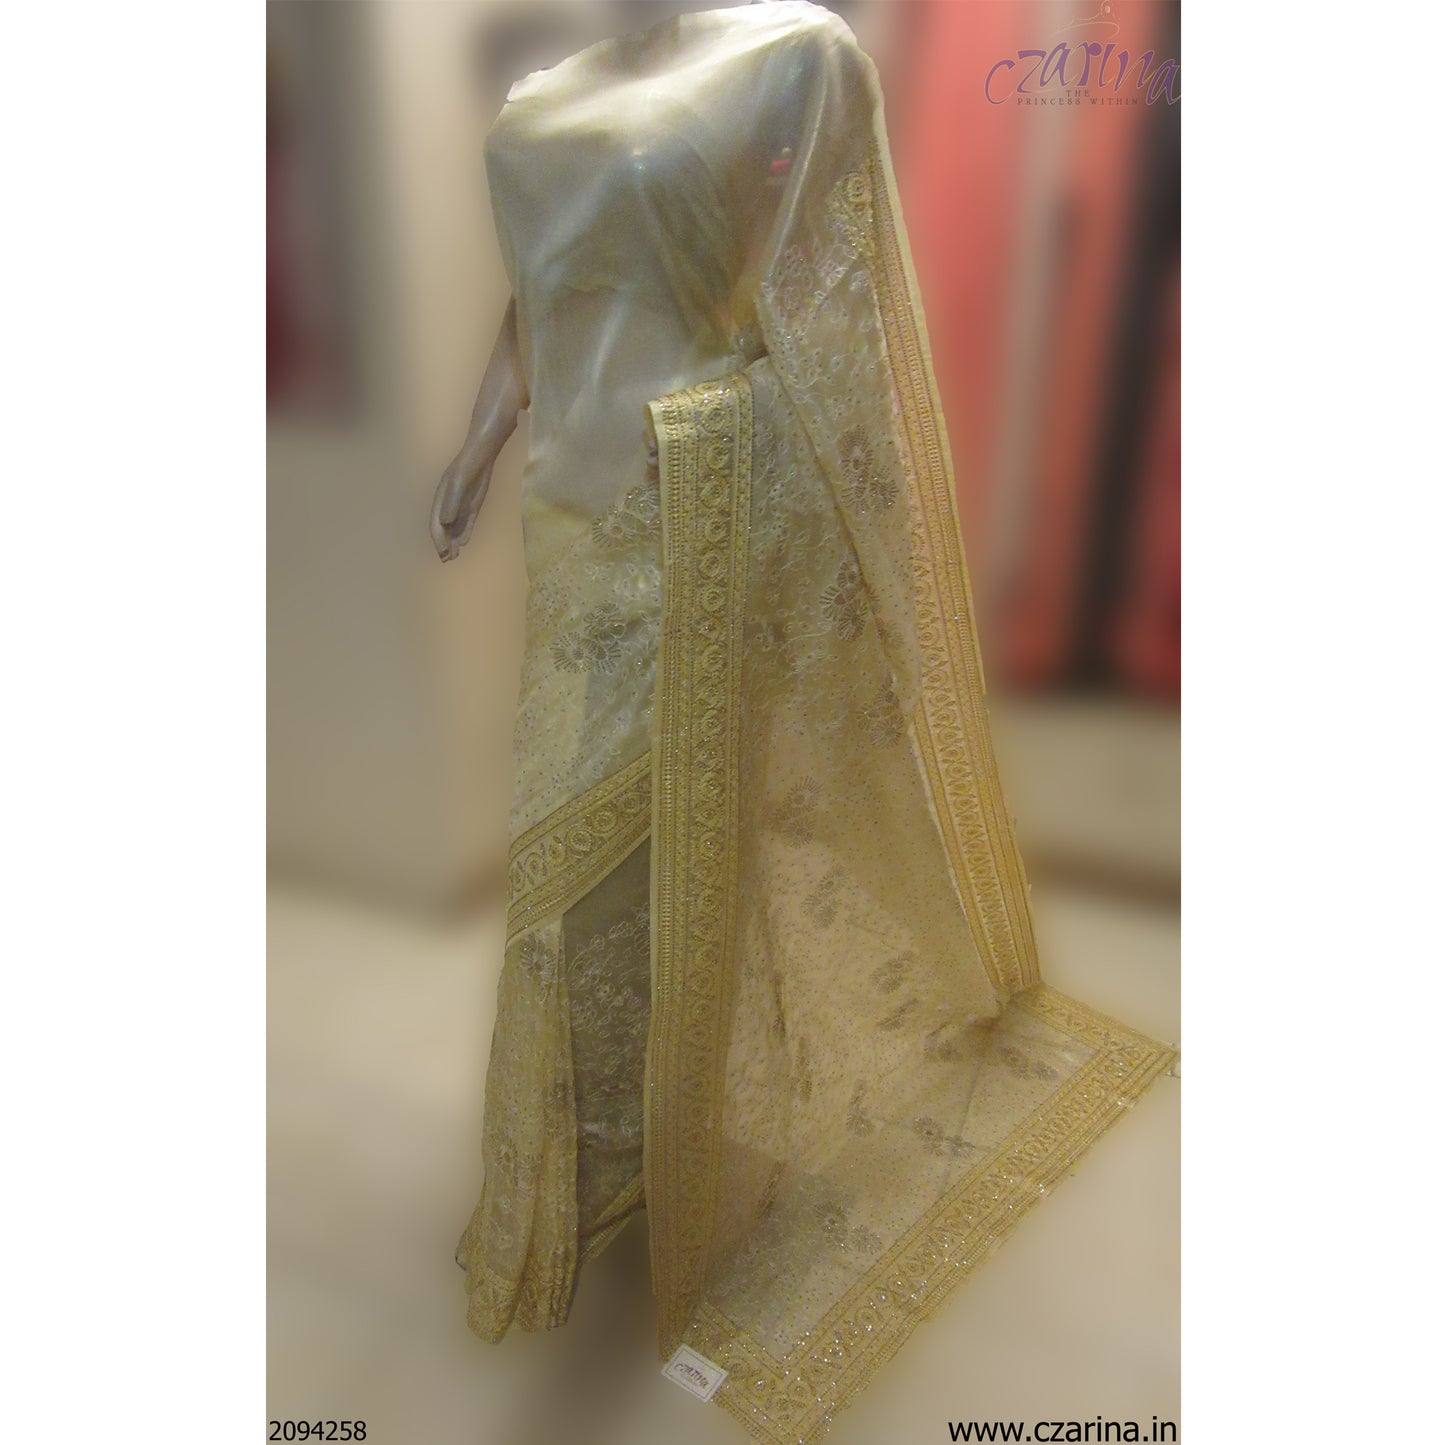 PALE YELLOW EMBROIDERED ORGANZA SAREE